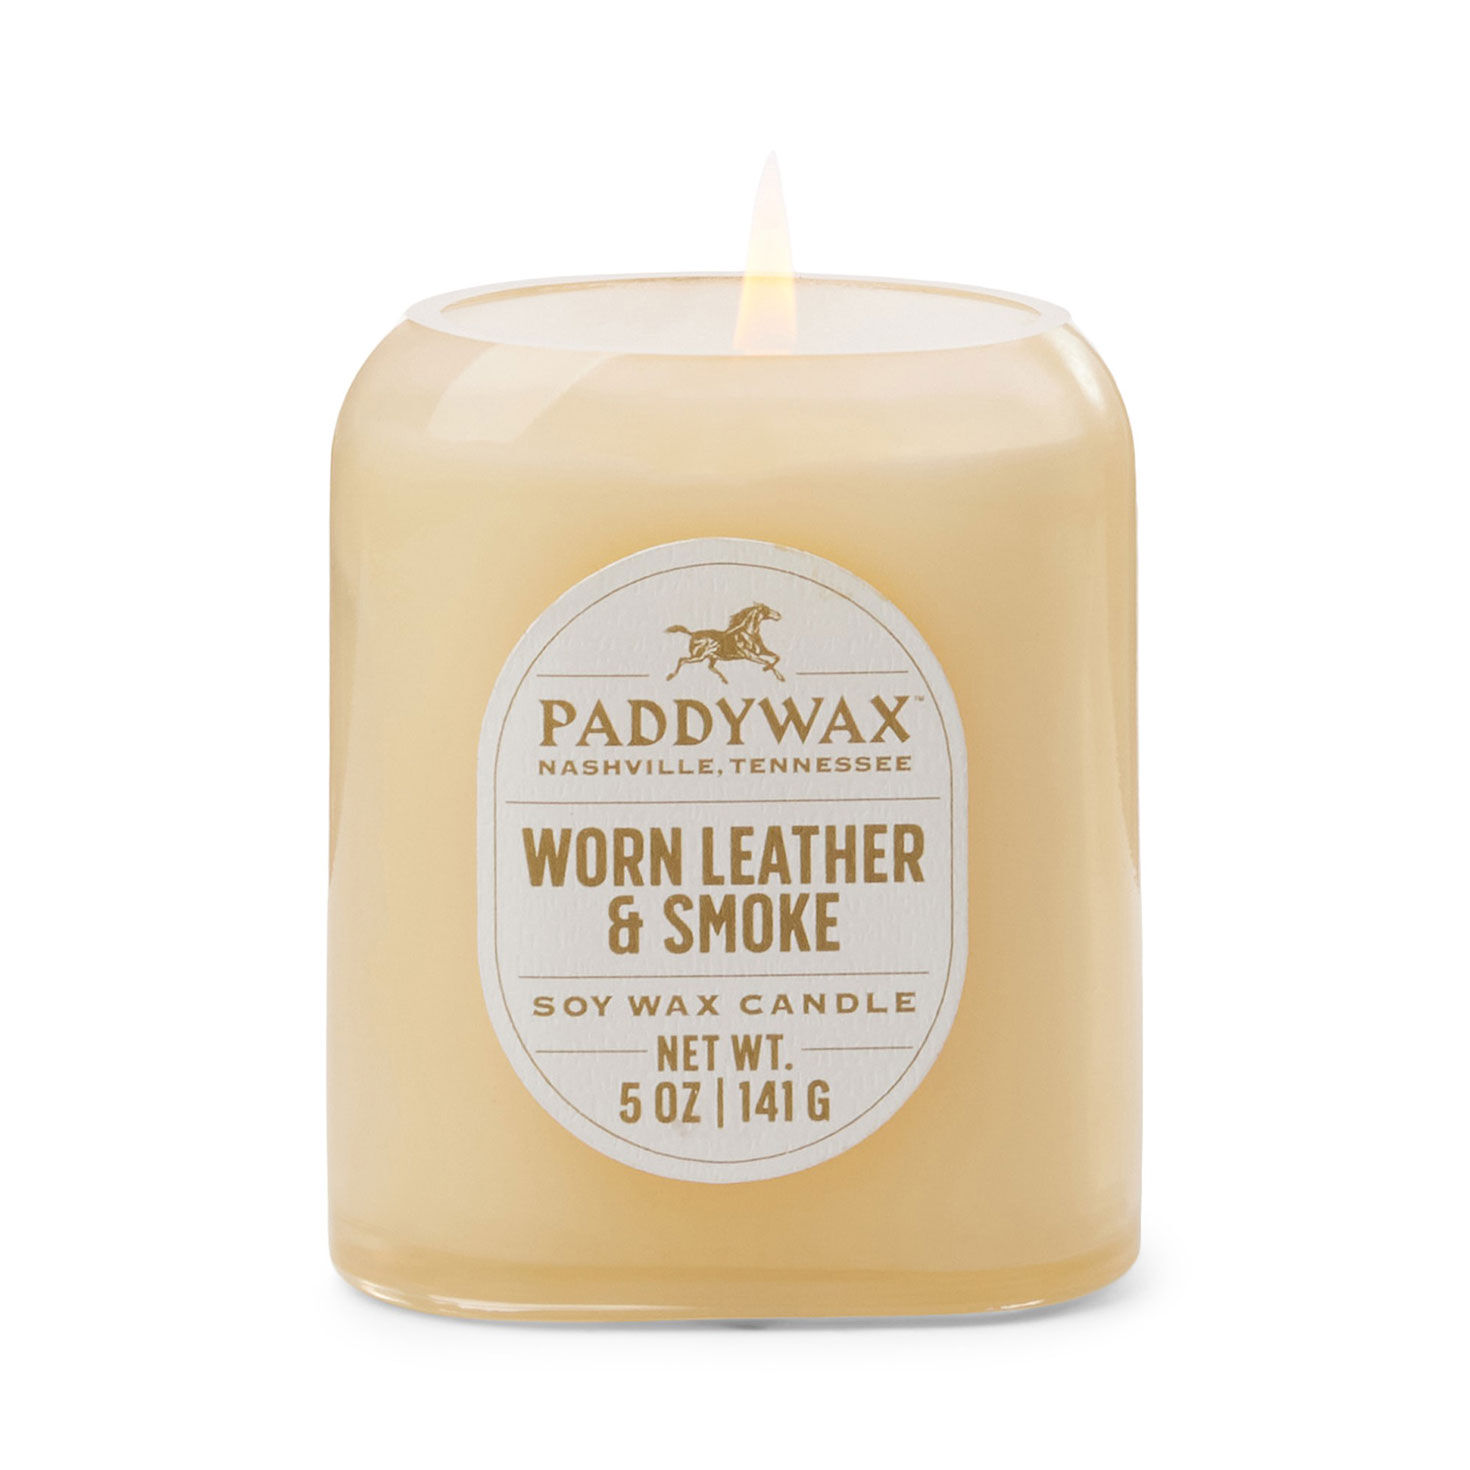 Paddywax Worn Leather and Smoke Vista Candle, 5 oz. for only USD 18.99 | Hallmark